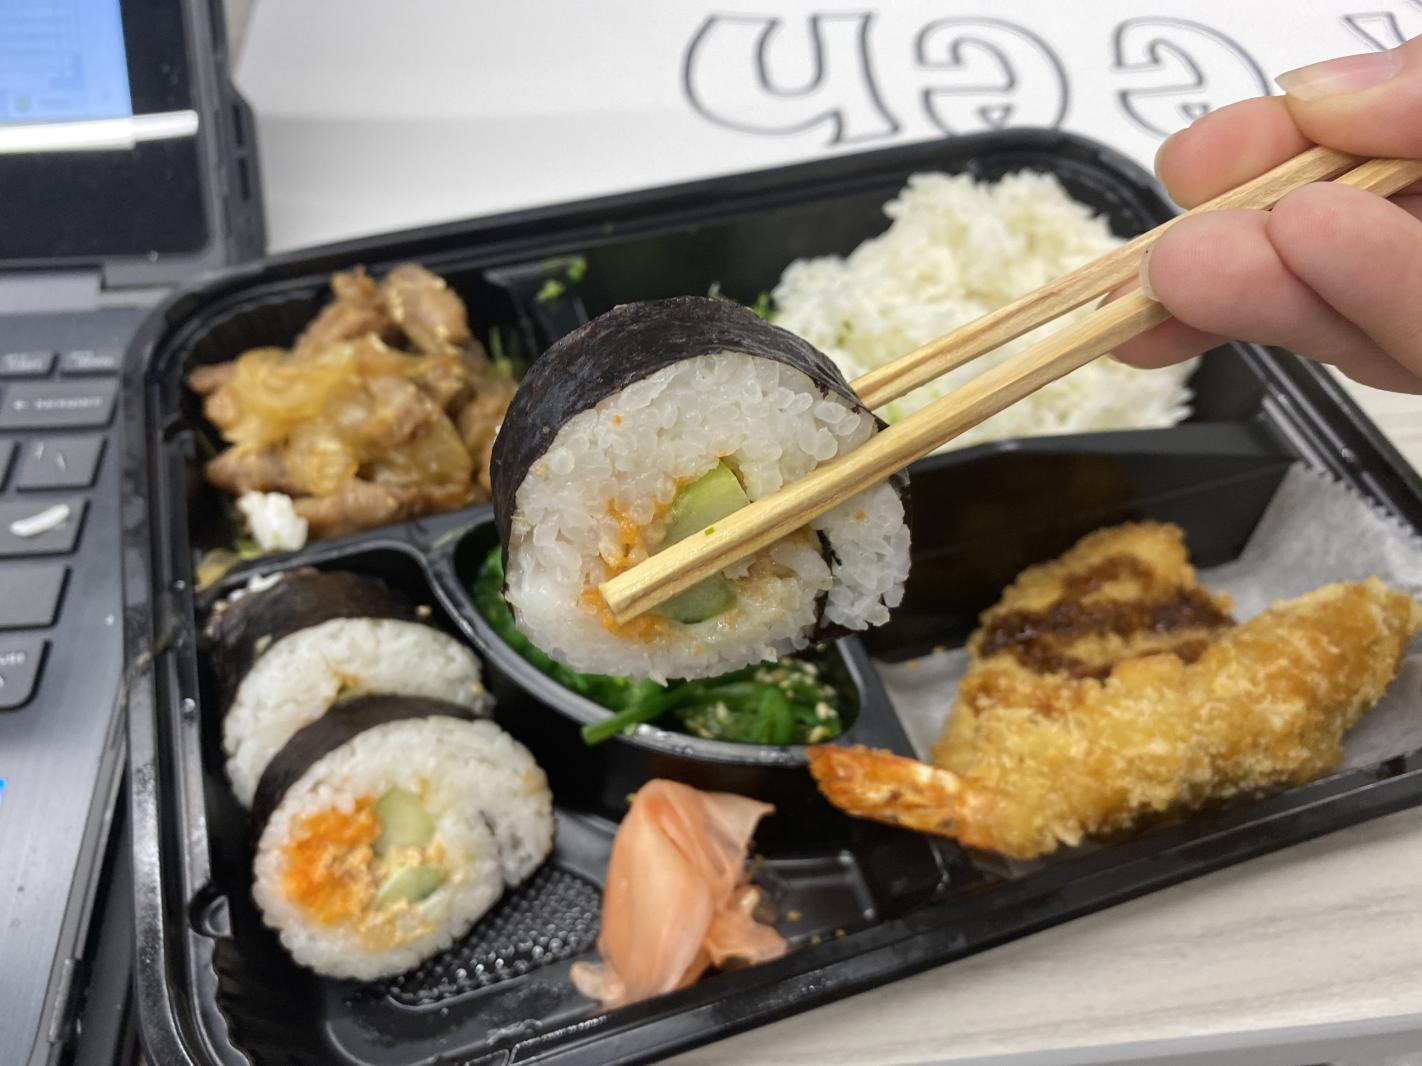 The chicken bento box contained a variety of foods, including sushi and rice. The Japanese Club sold over 200 bentos.